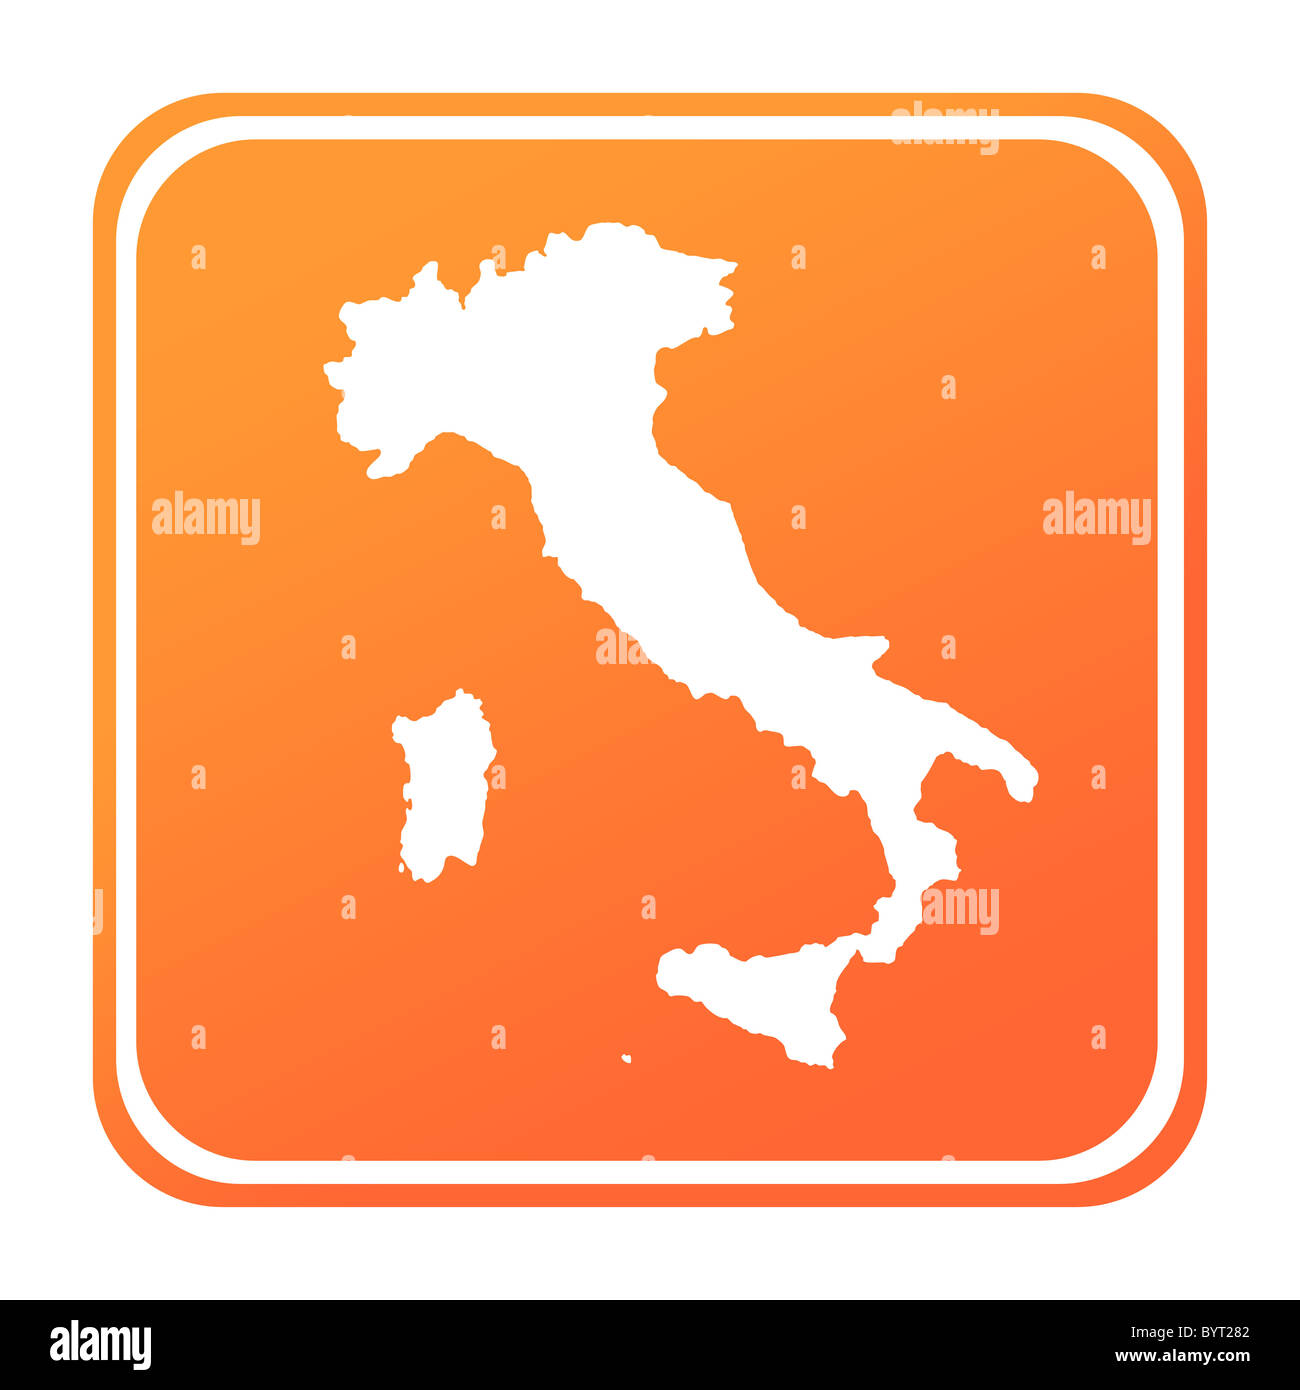 Illustration of Italy map button; isolated on white background. Stock Photo